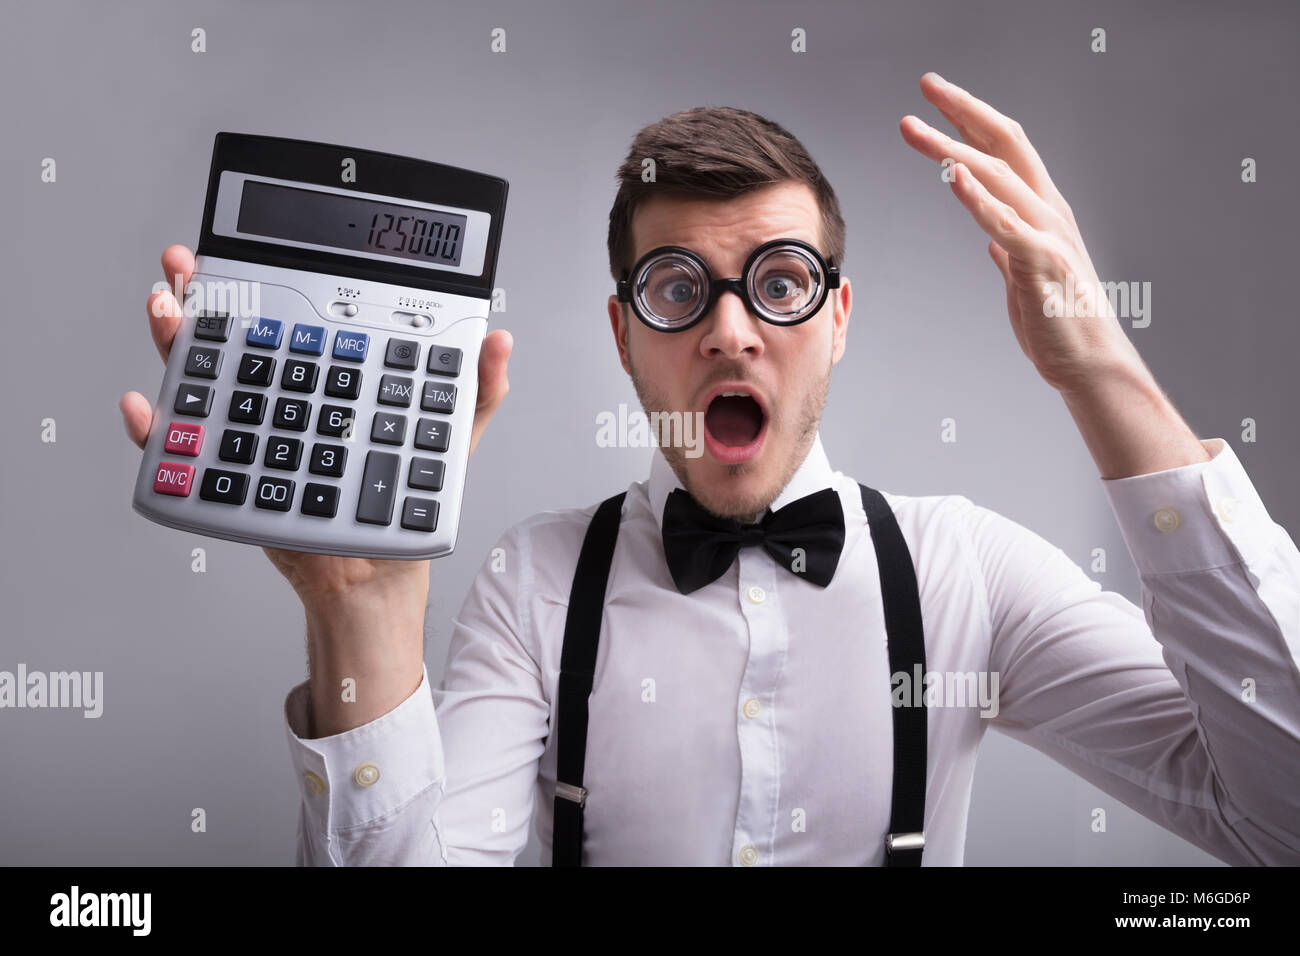 Shocked Young Man Holding Calculator On Grey Background Stock Photo